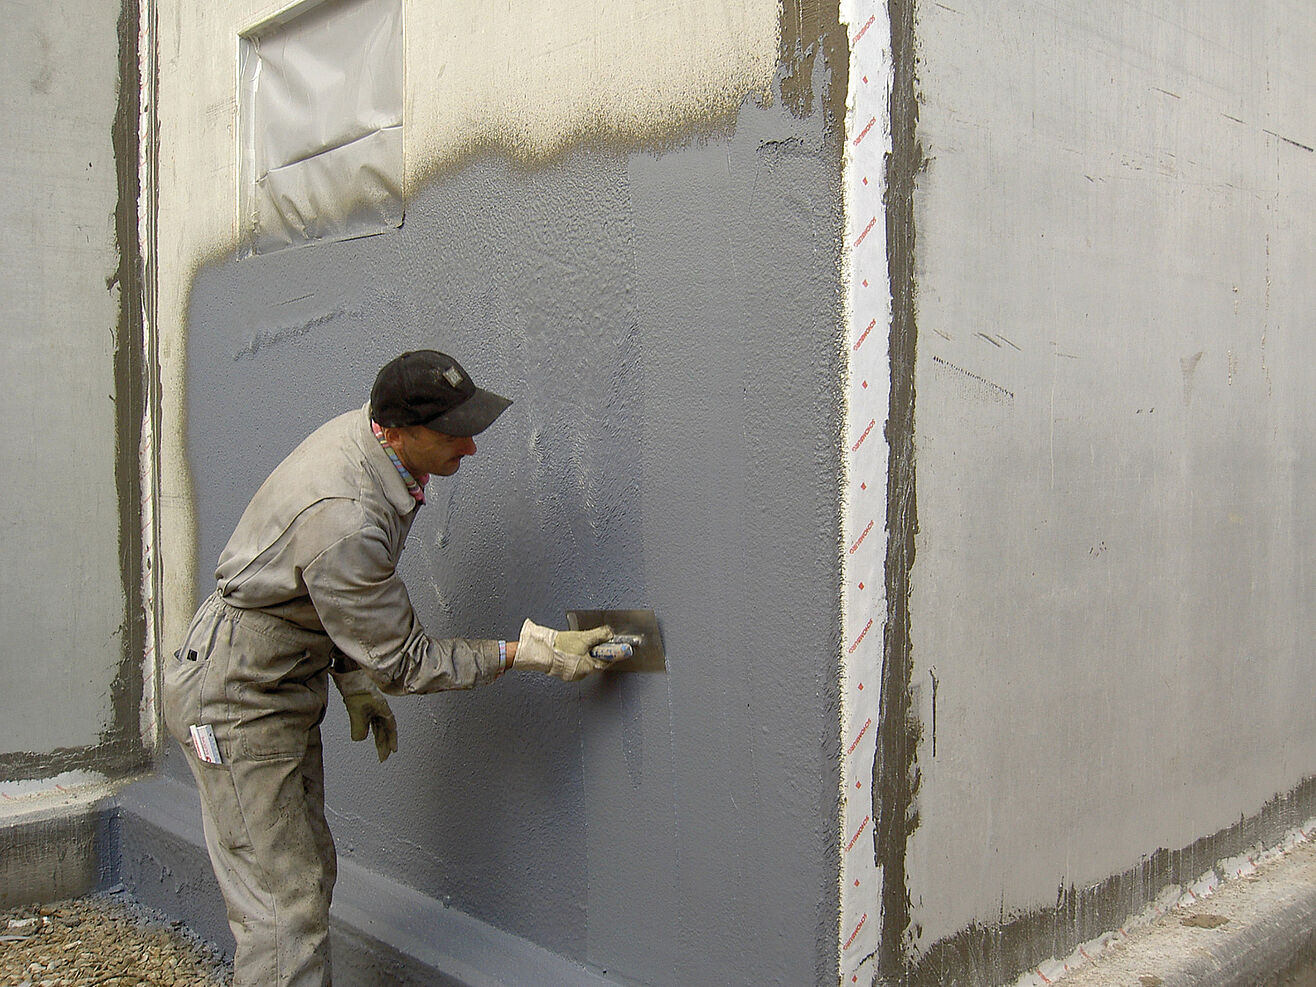 Waterproofing Materials Based on Cement